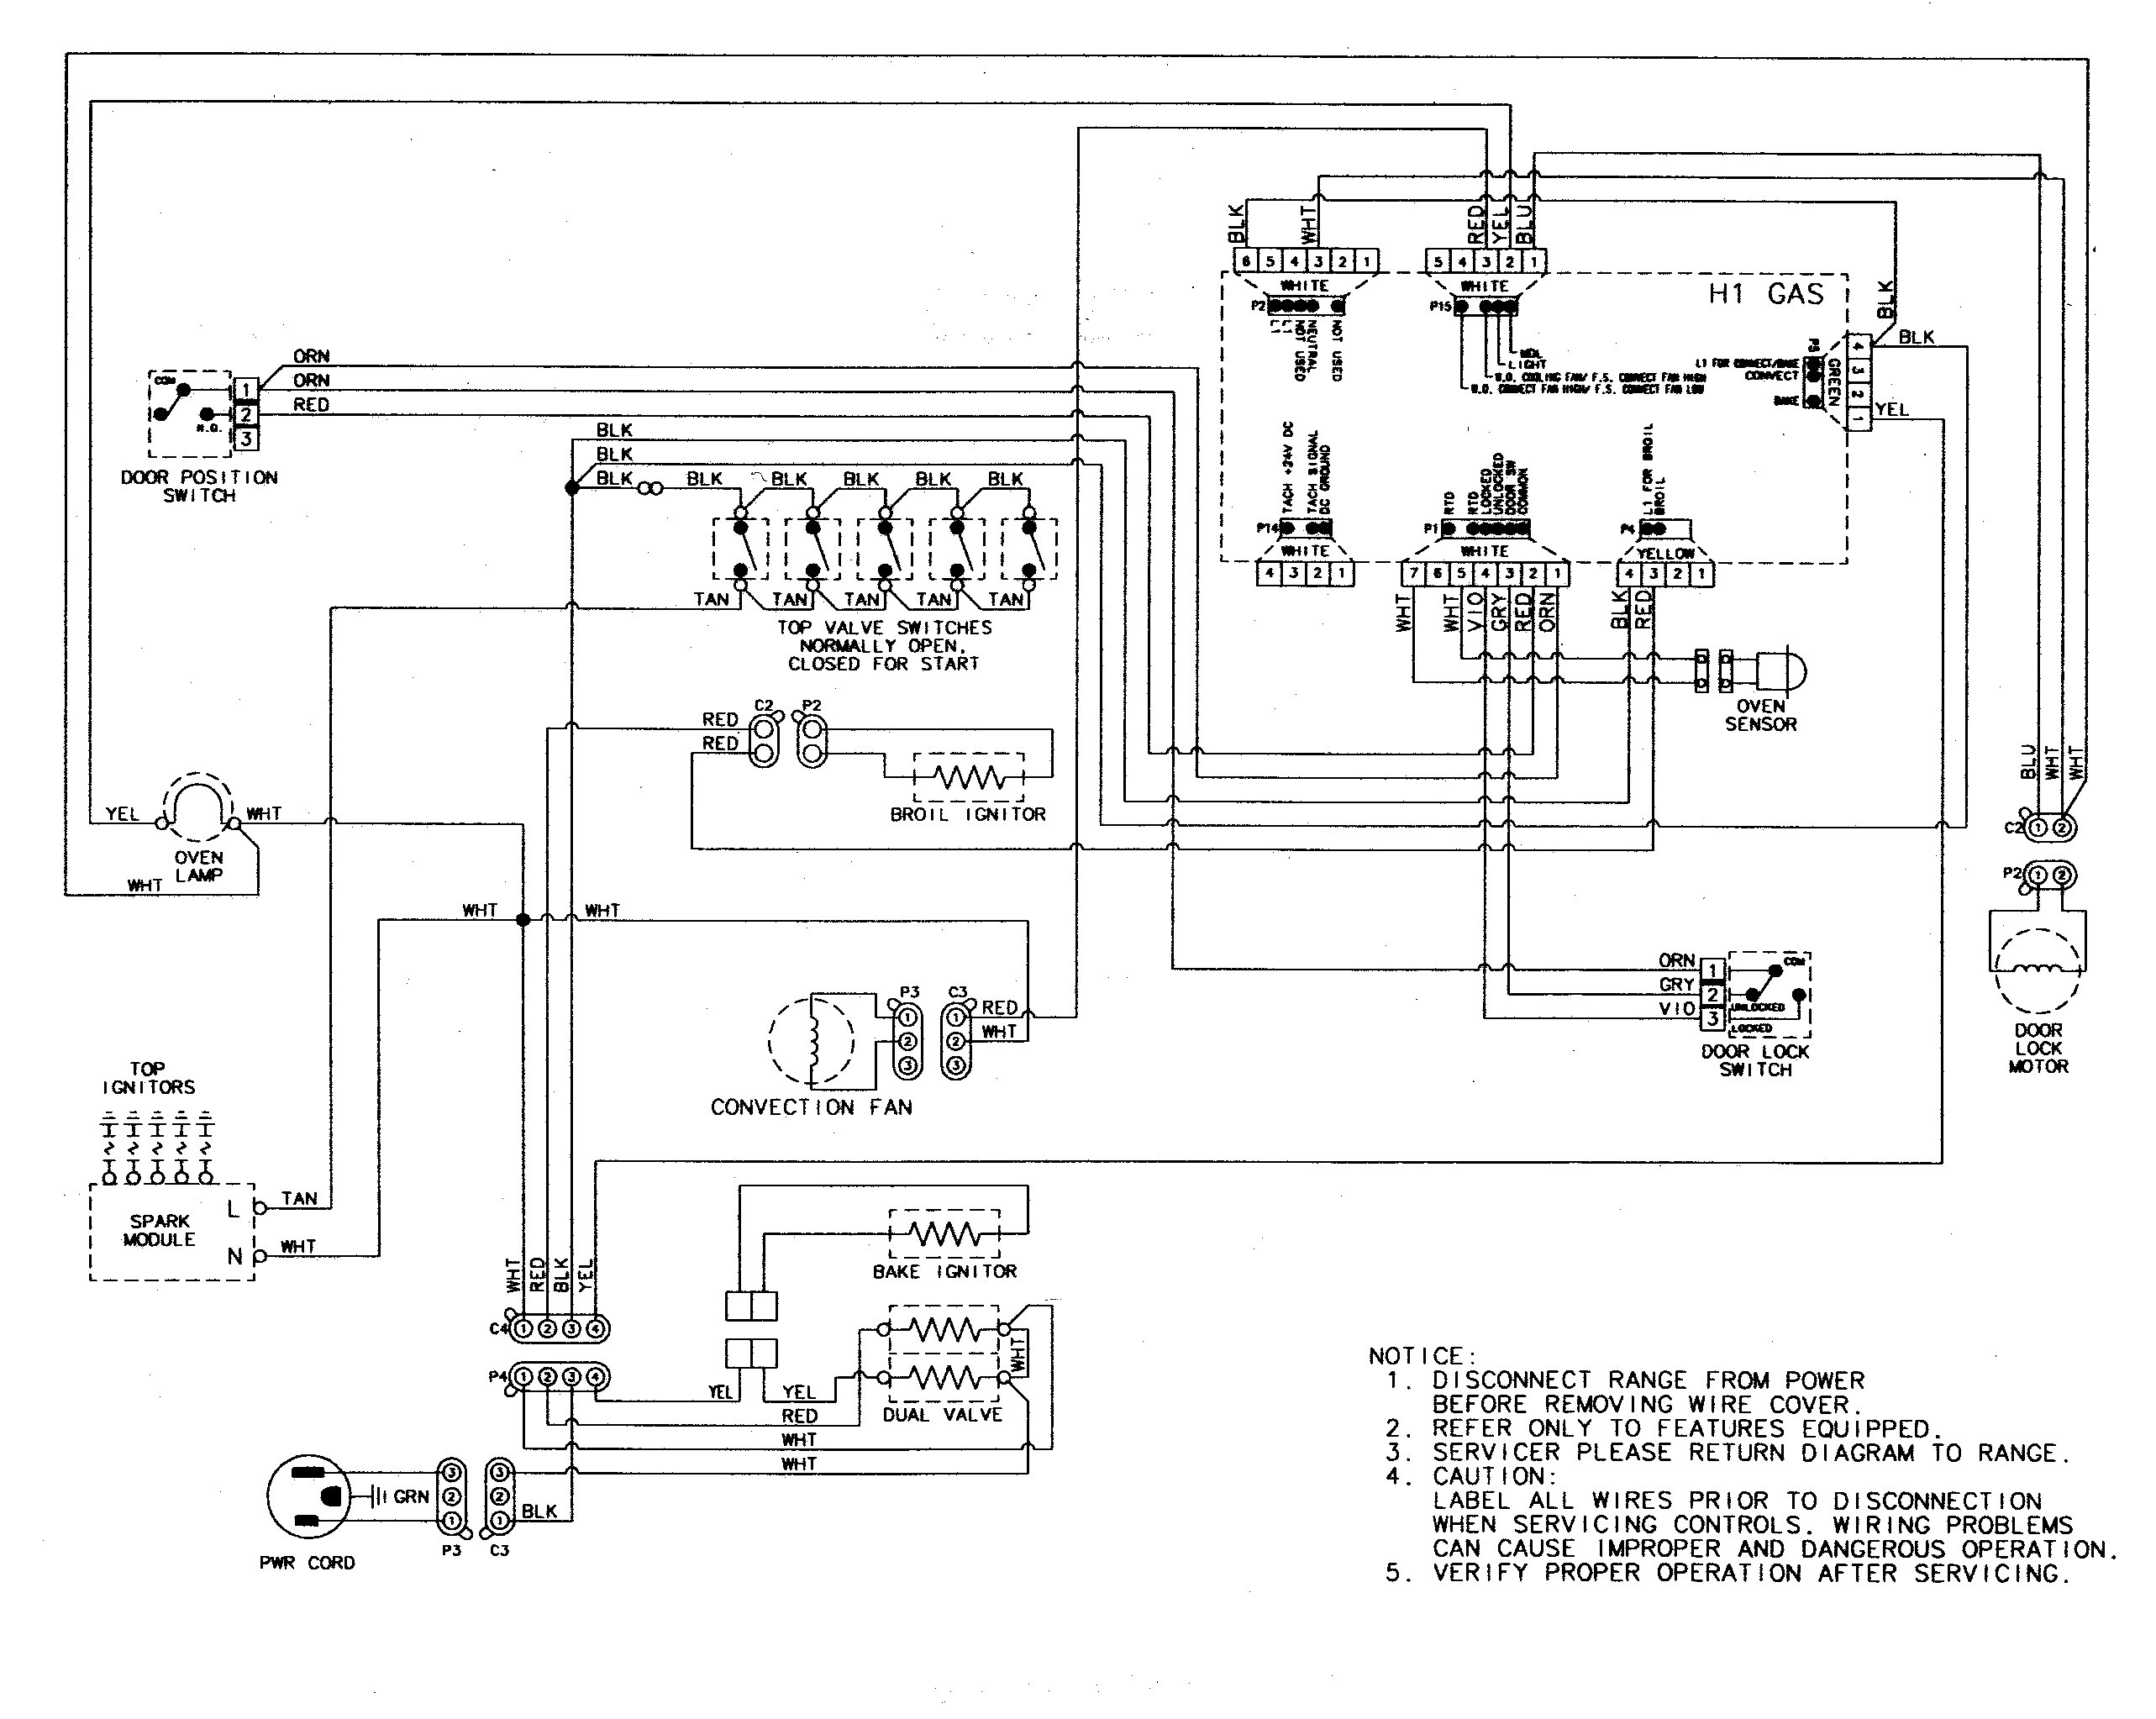 Wiring Diagram for Trailer Archives L2archive Refrence Wiring Whirlpool Dryer Wiring Diagram Preisvergleich